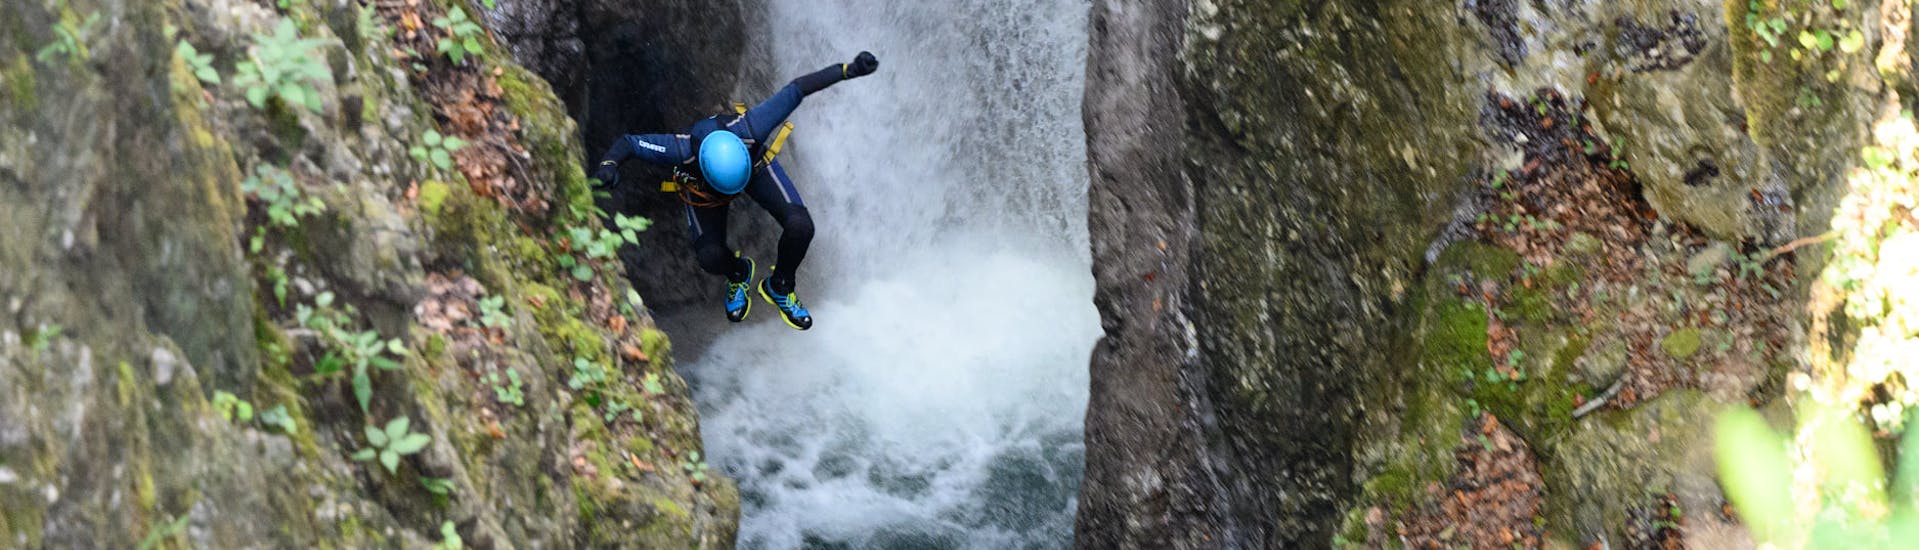 A customer jumping into the canyon at Canyoning Jumps and Action Strubklamm with Outdoor Guide Kaiserwinkl.